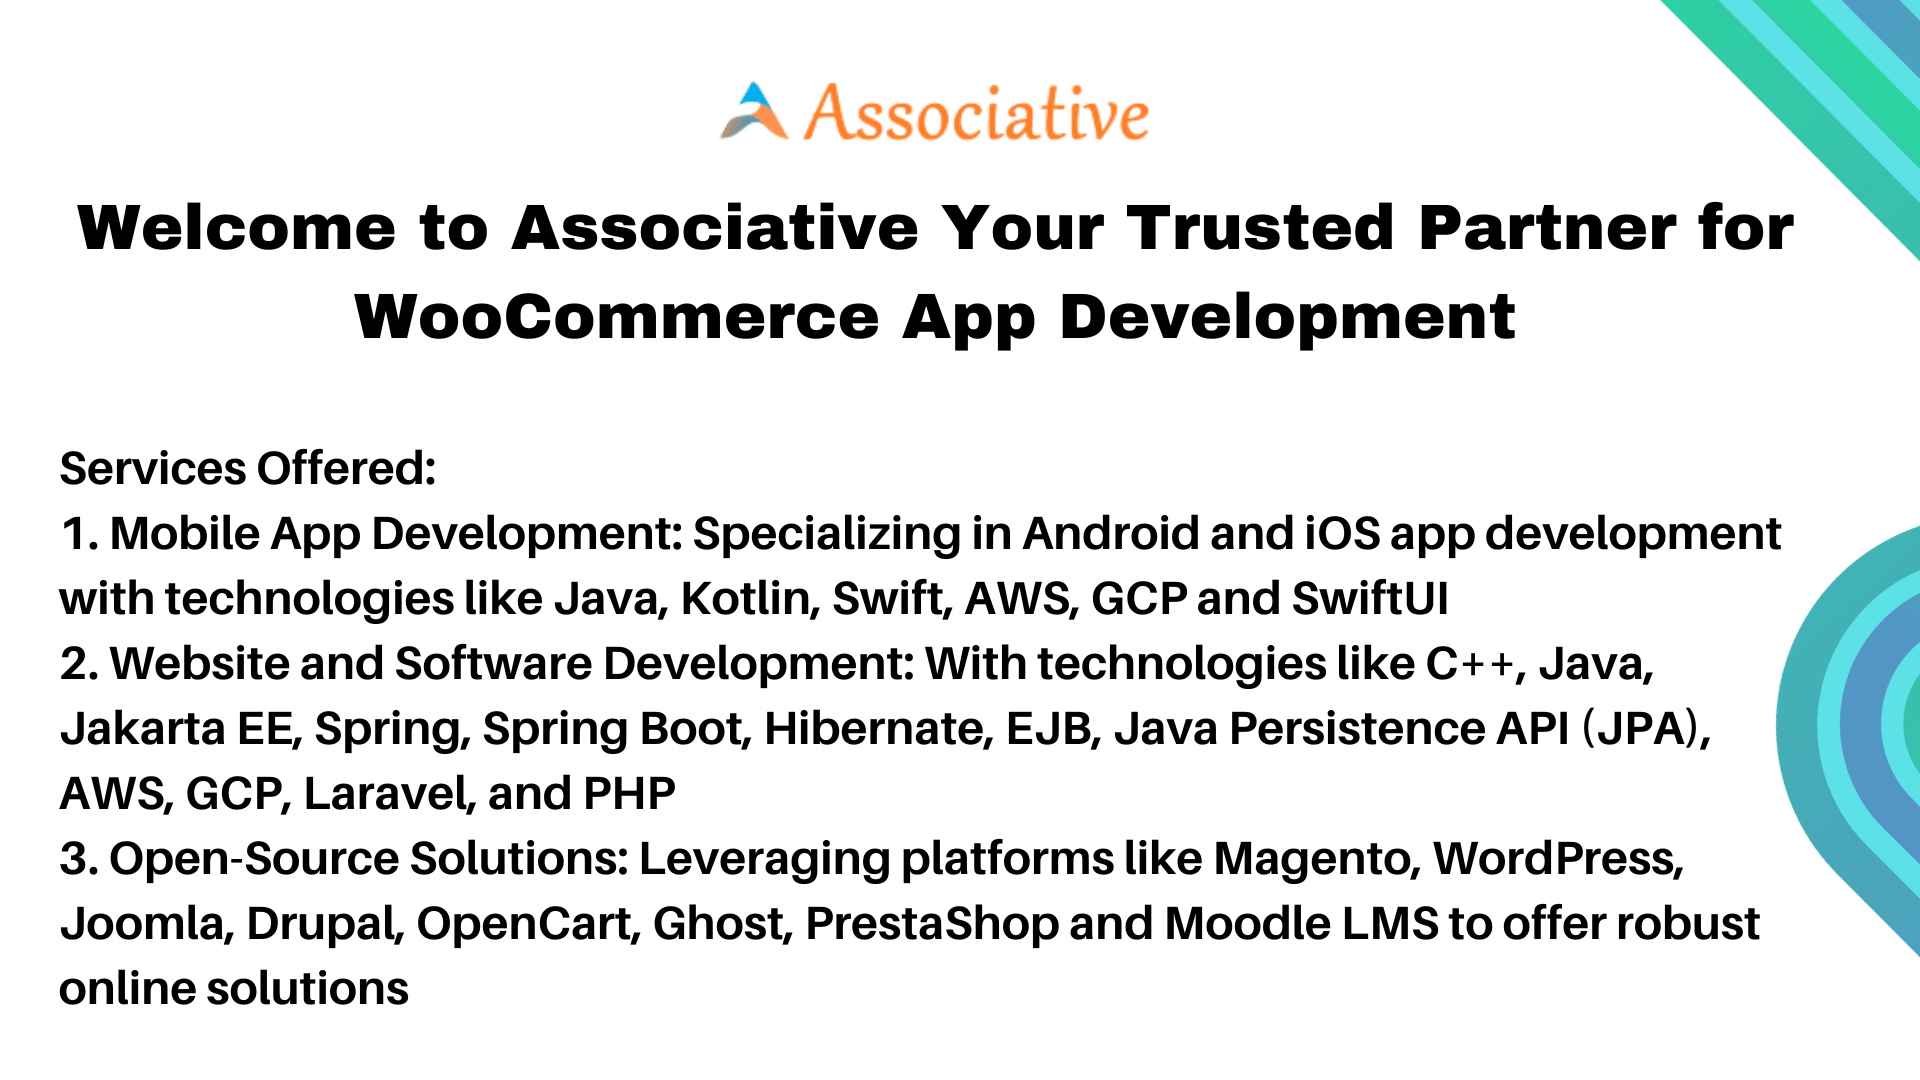 Welcome to Associative Your Trusted Partner for WooCommerce App Development